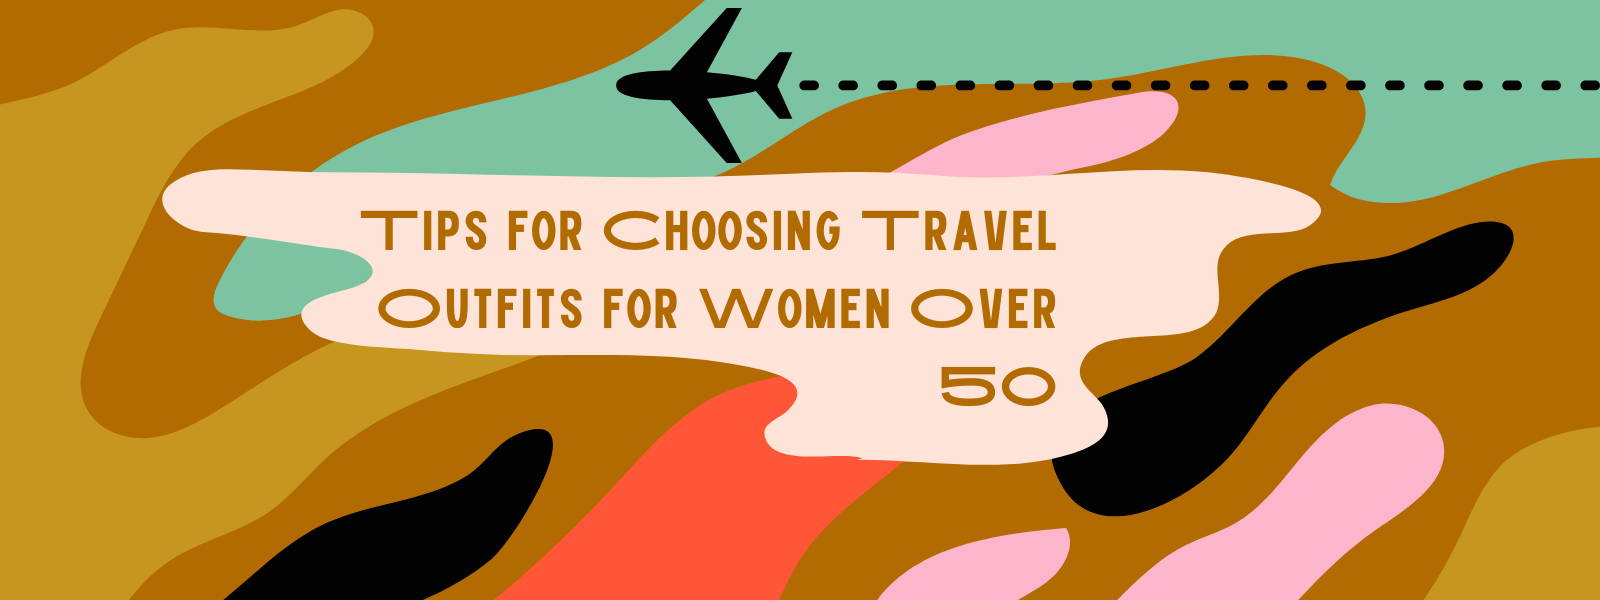 Tips for Choosing Travel Outfits for Women Over 50